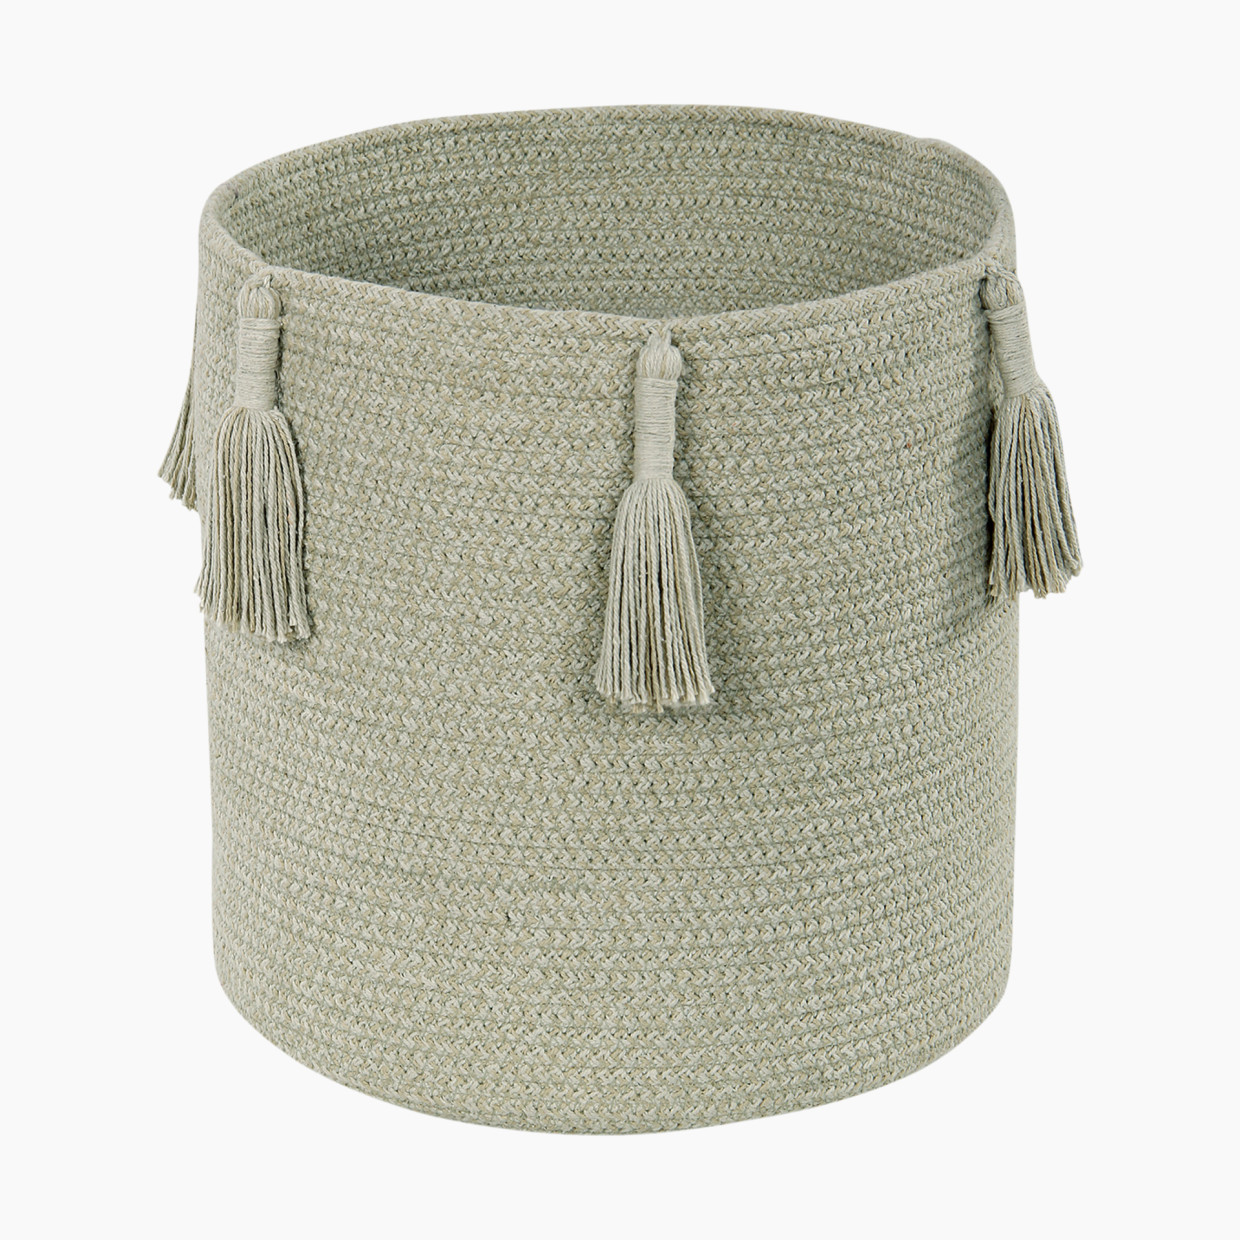 Lorena Canals Woody Basket - Olive.